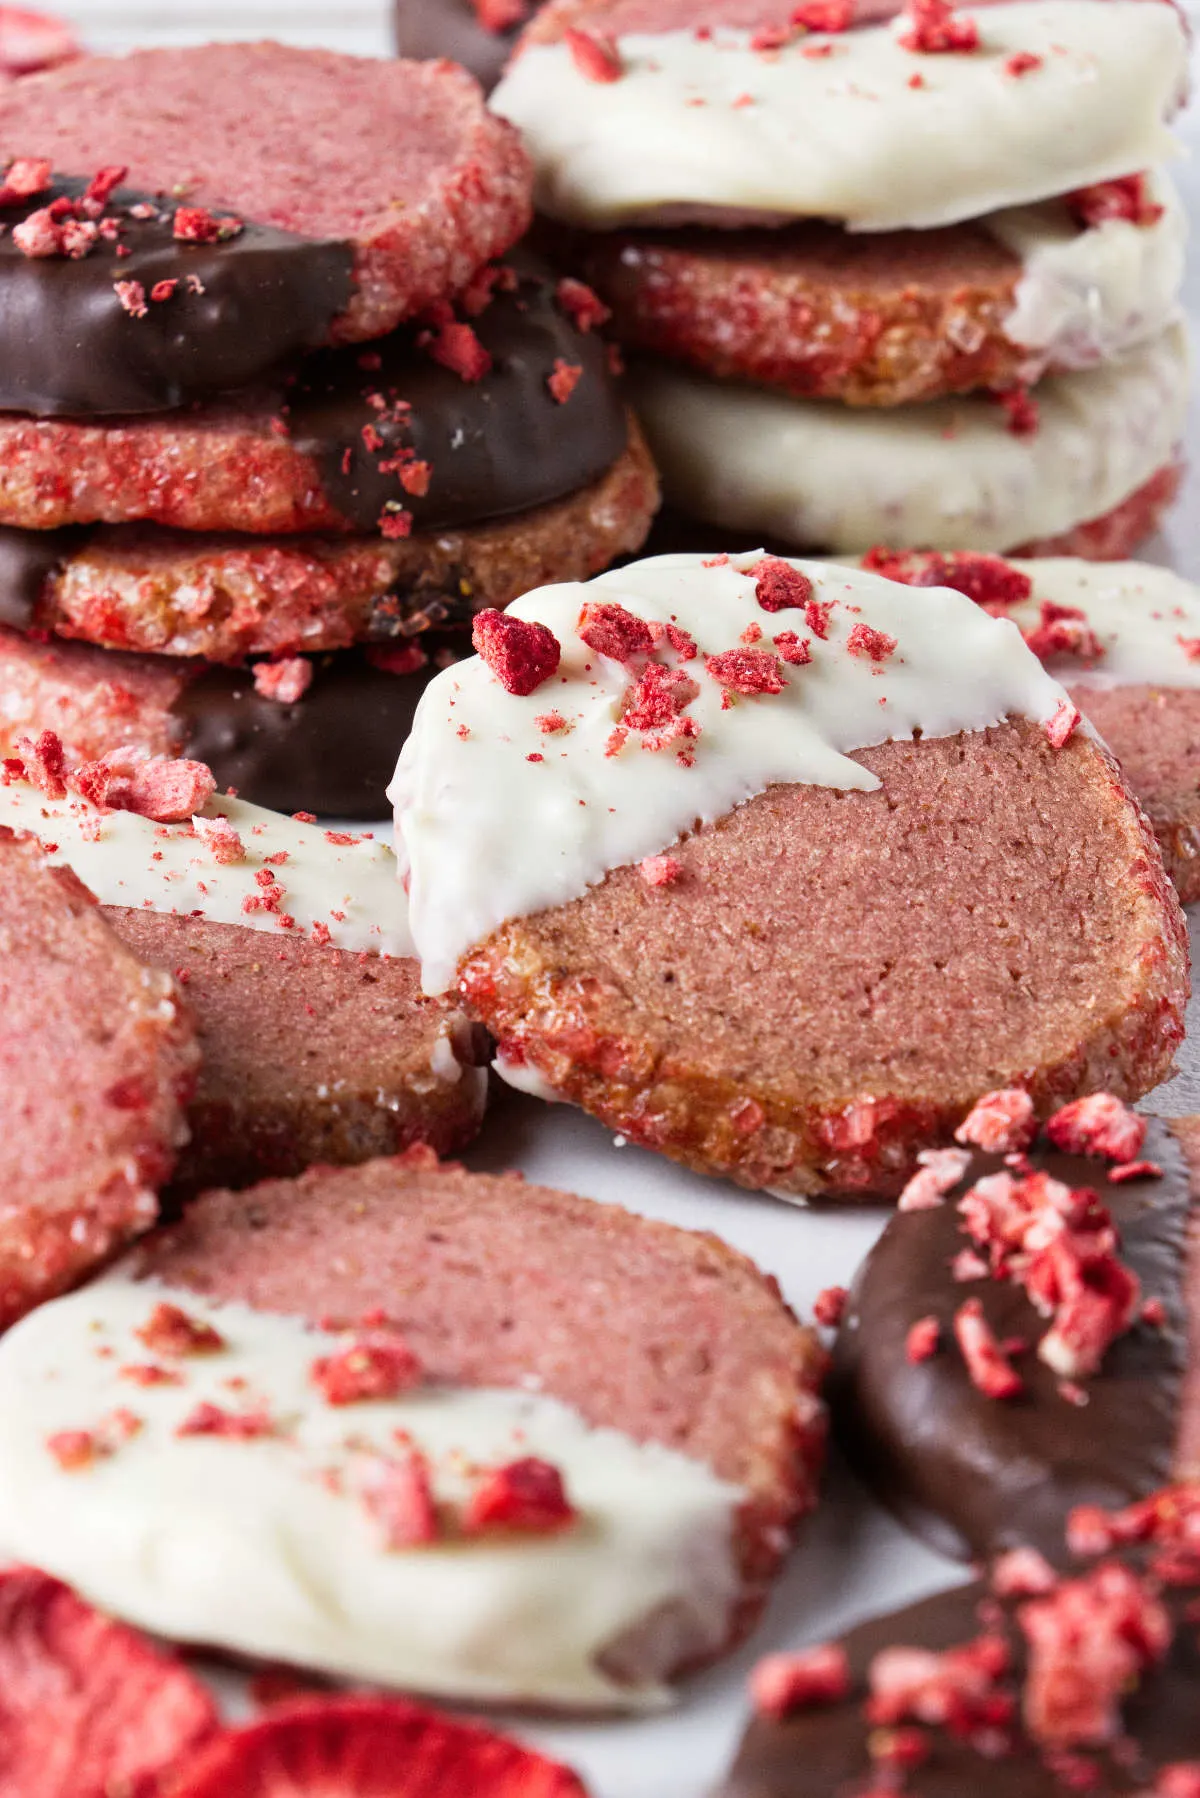 Chocolate dipped strawberry cookies with crumbled dried strawberries sprinkled on top.